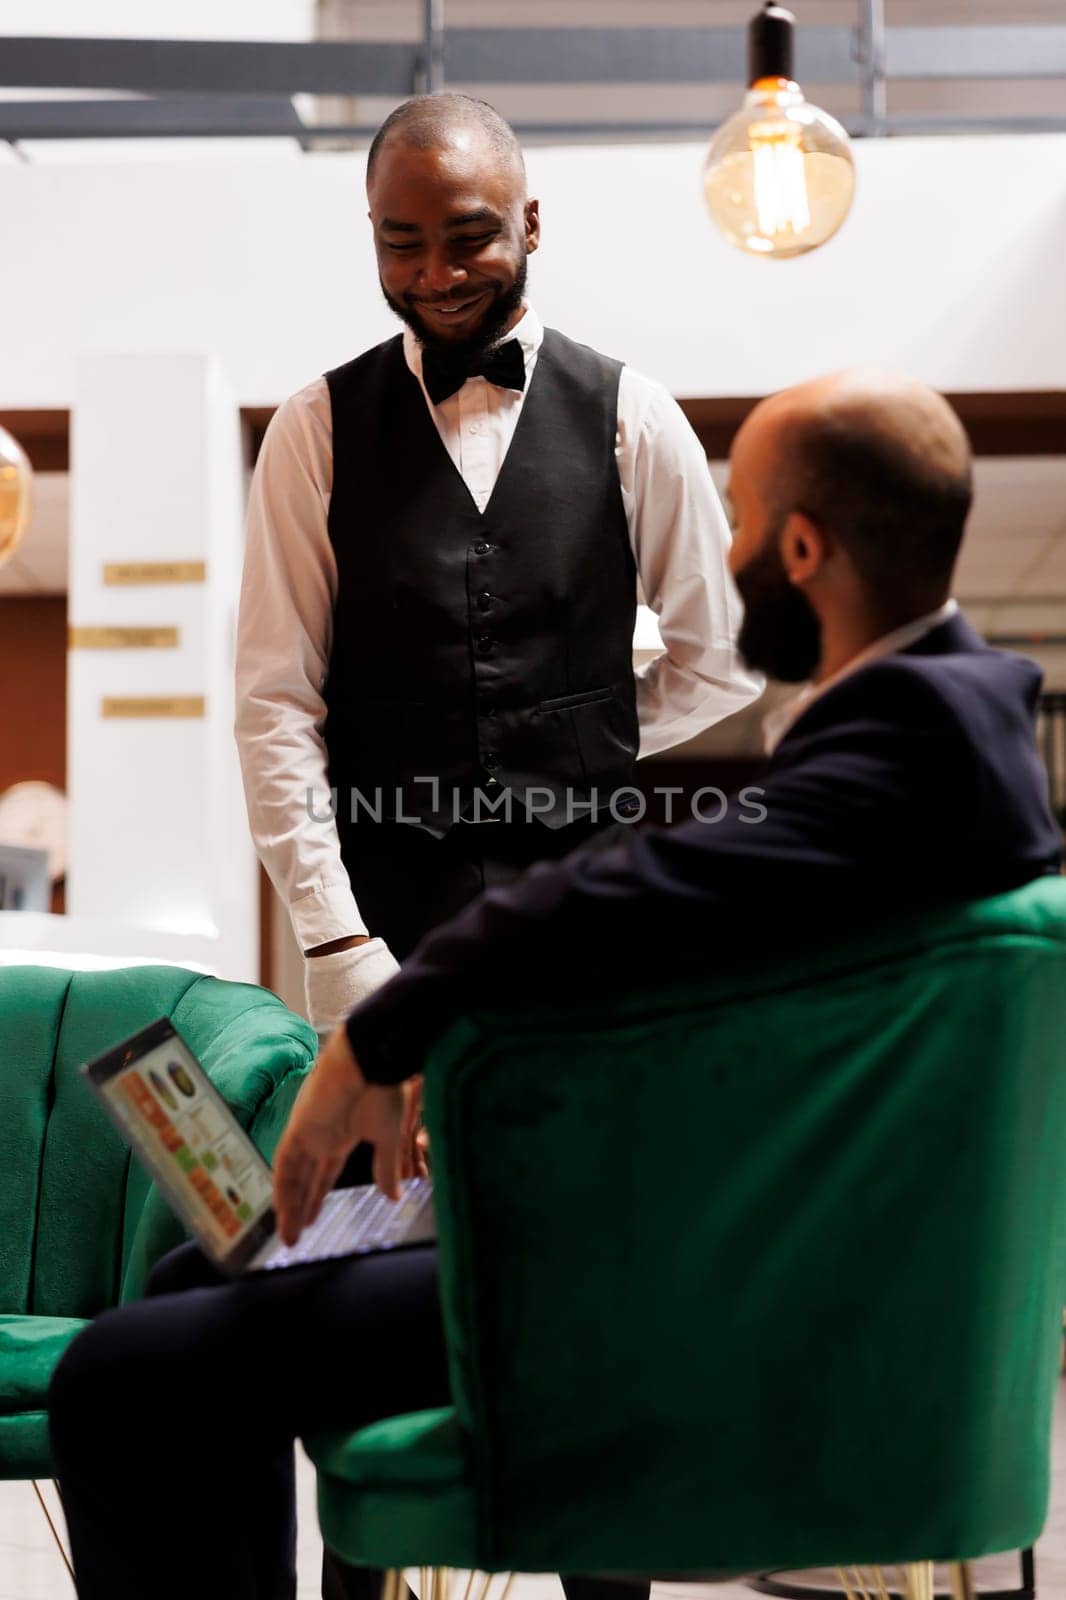 Bellboy talking to client in lounge area by DCStudio